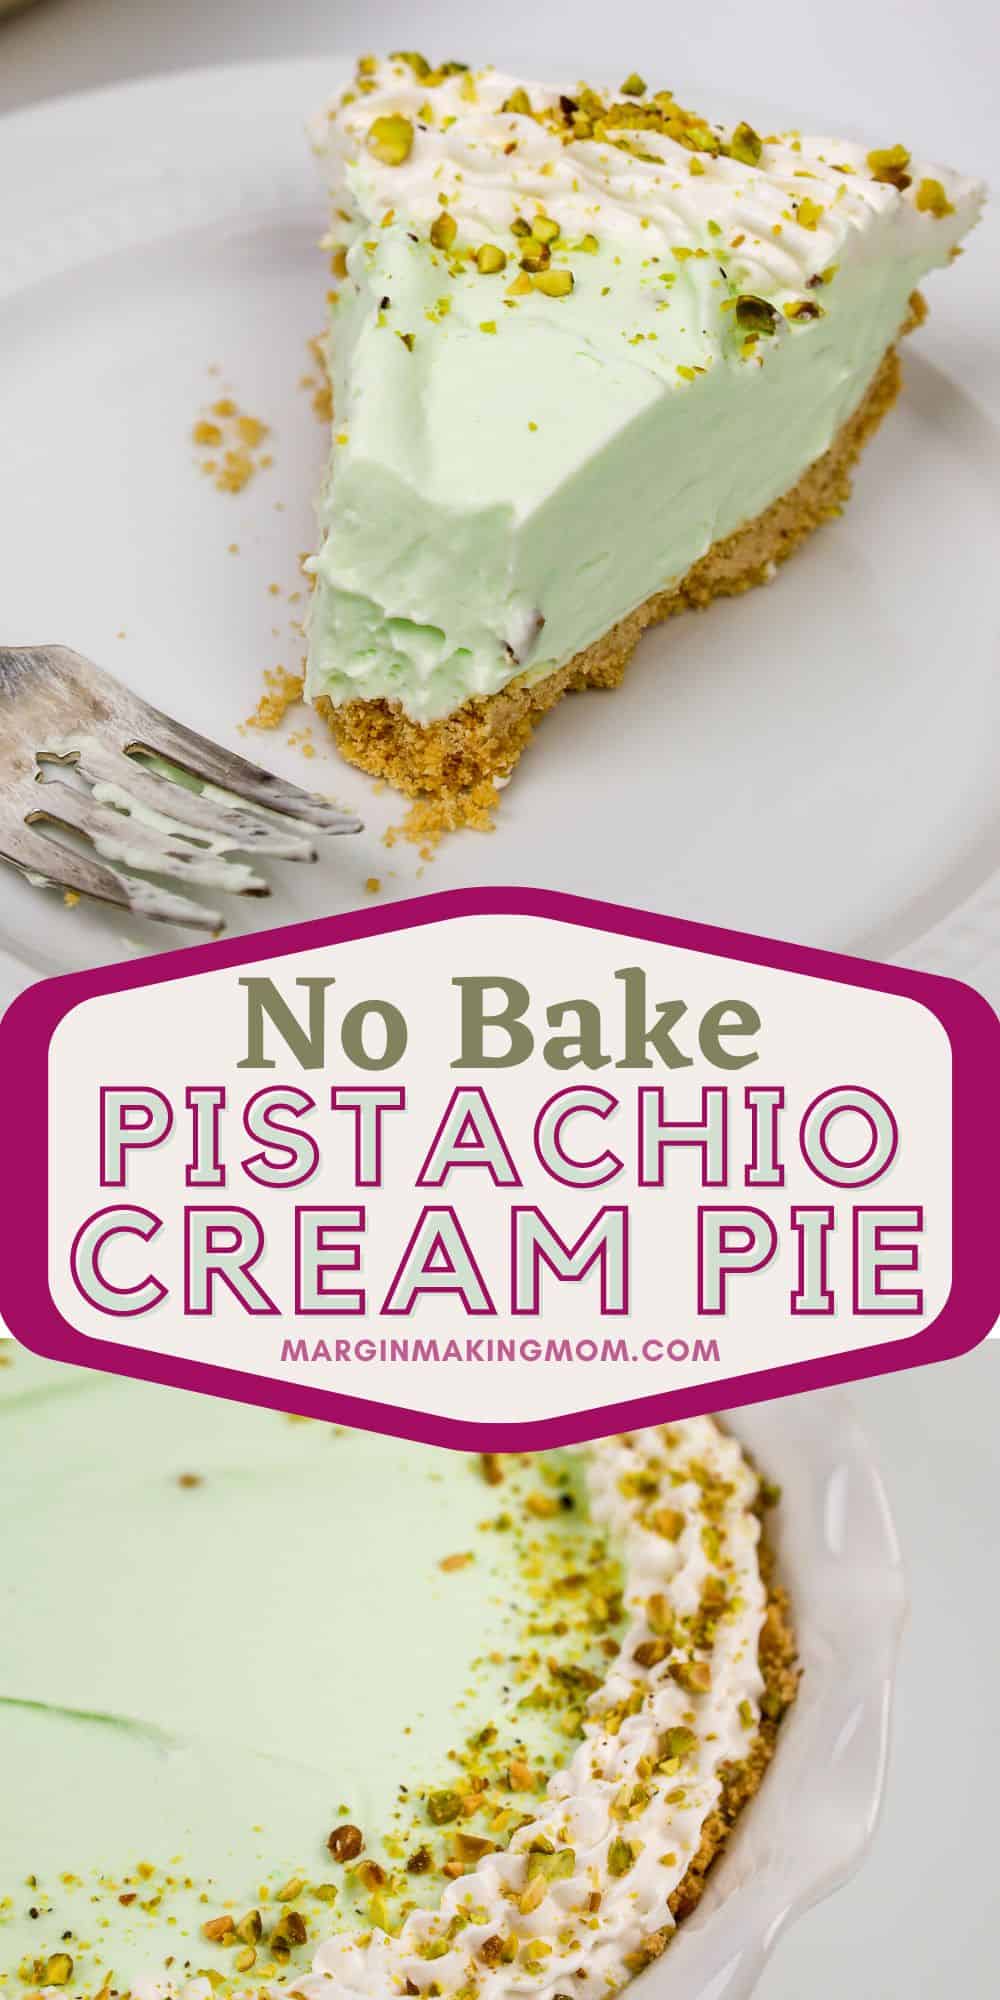 two photos; one shows a slice of pistachio cream pie with a bite taken out of it, while the other shows the whole pie before it's sliced